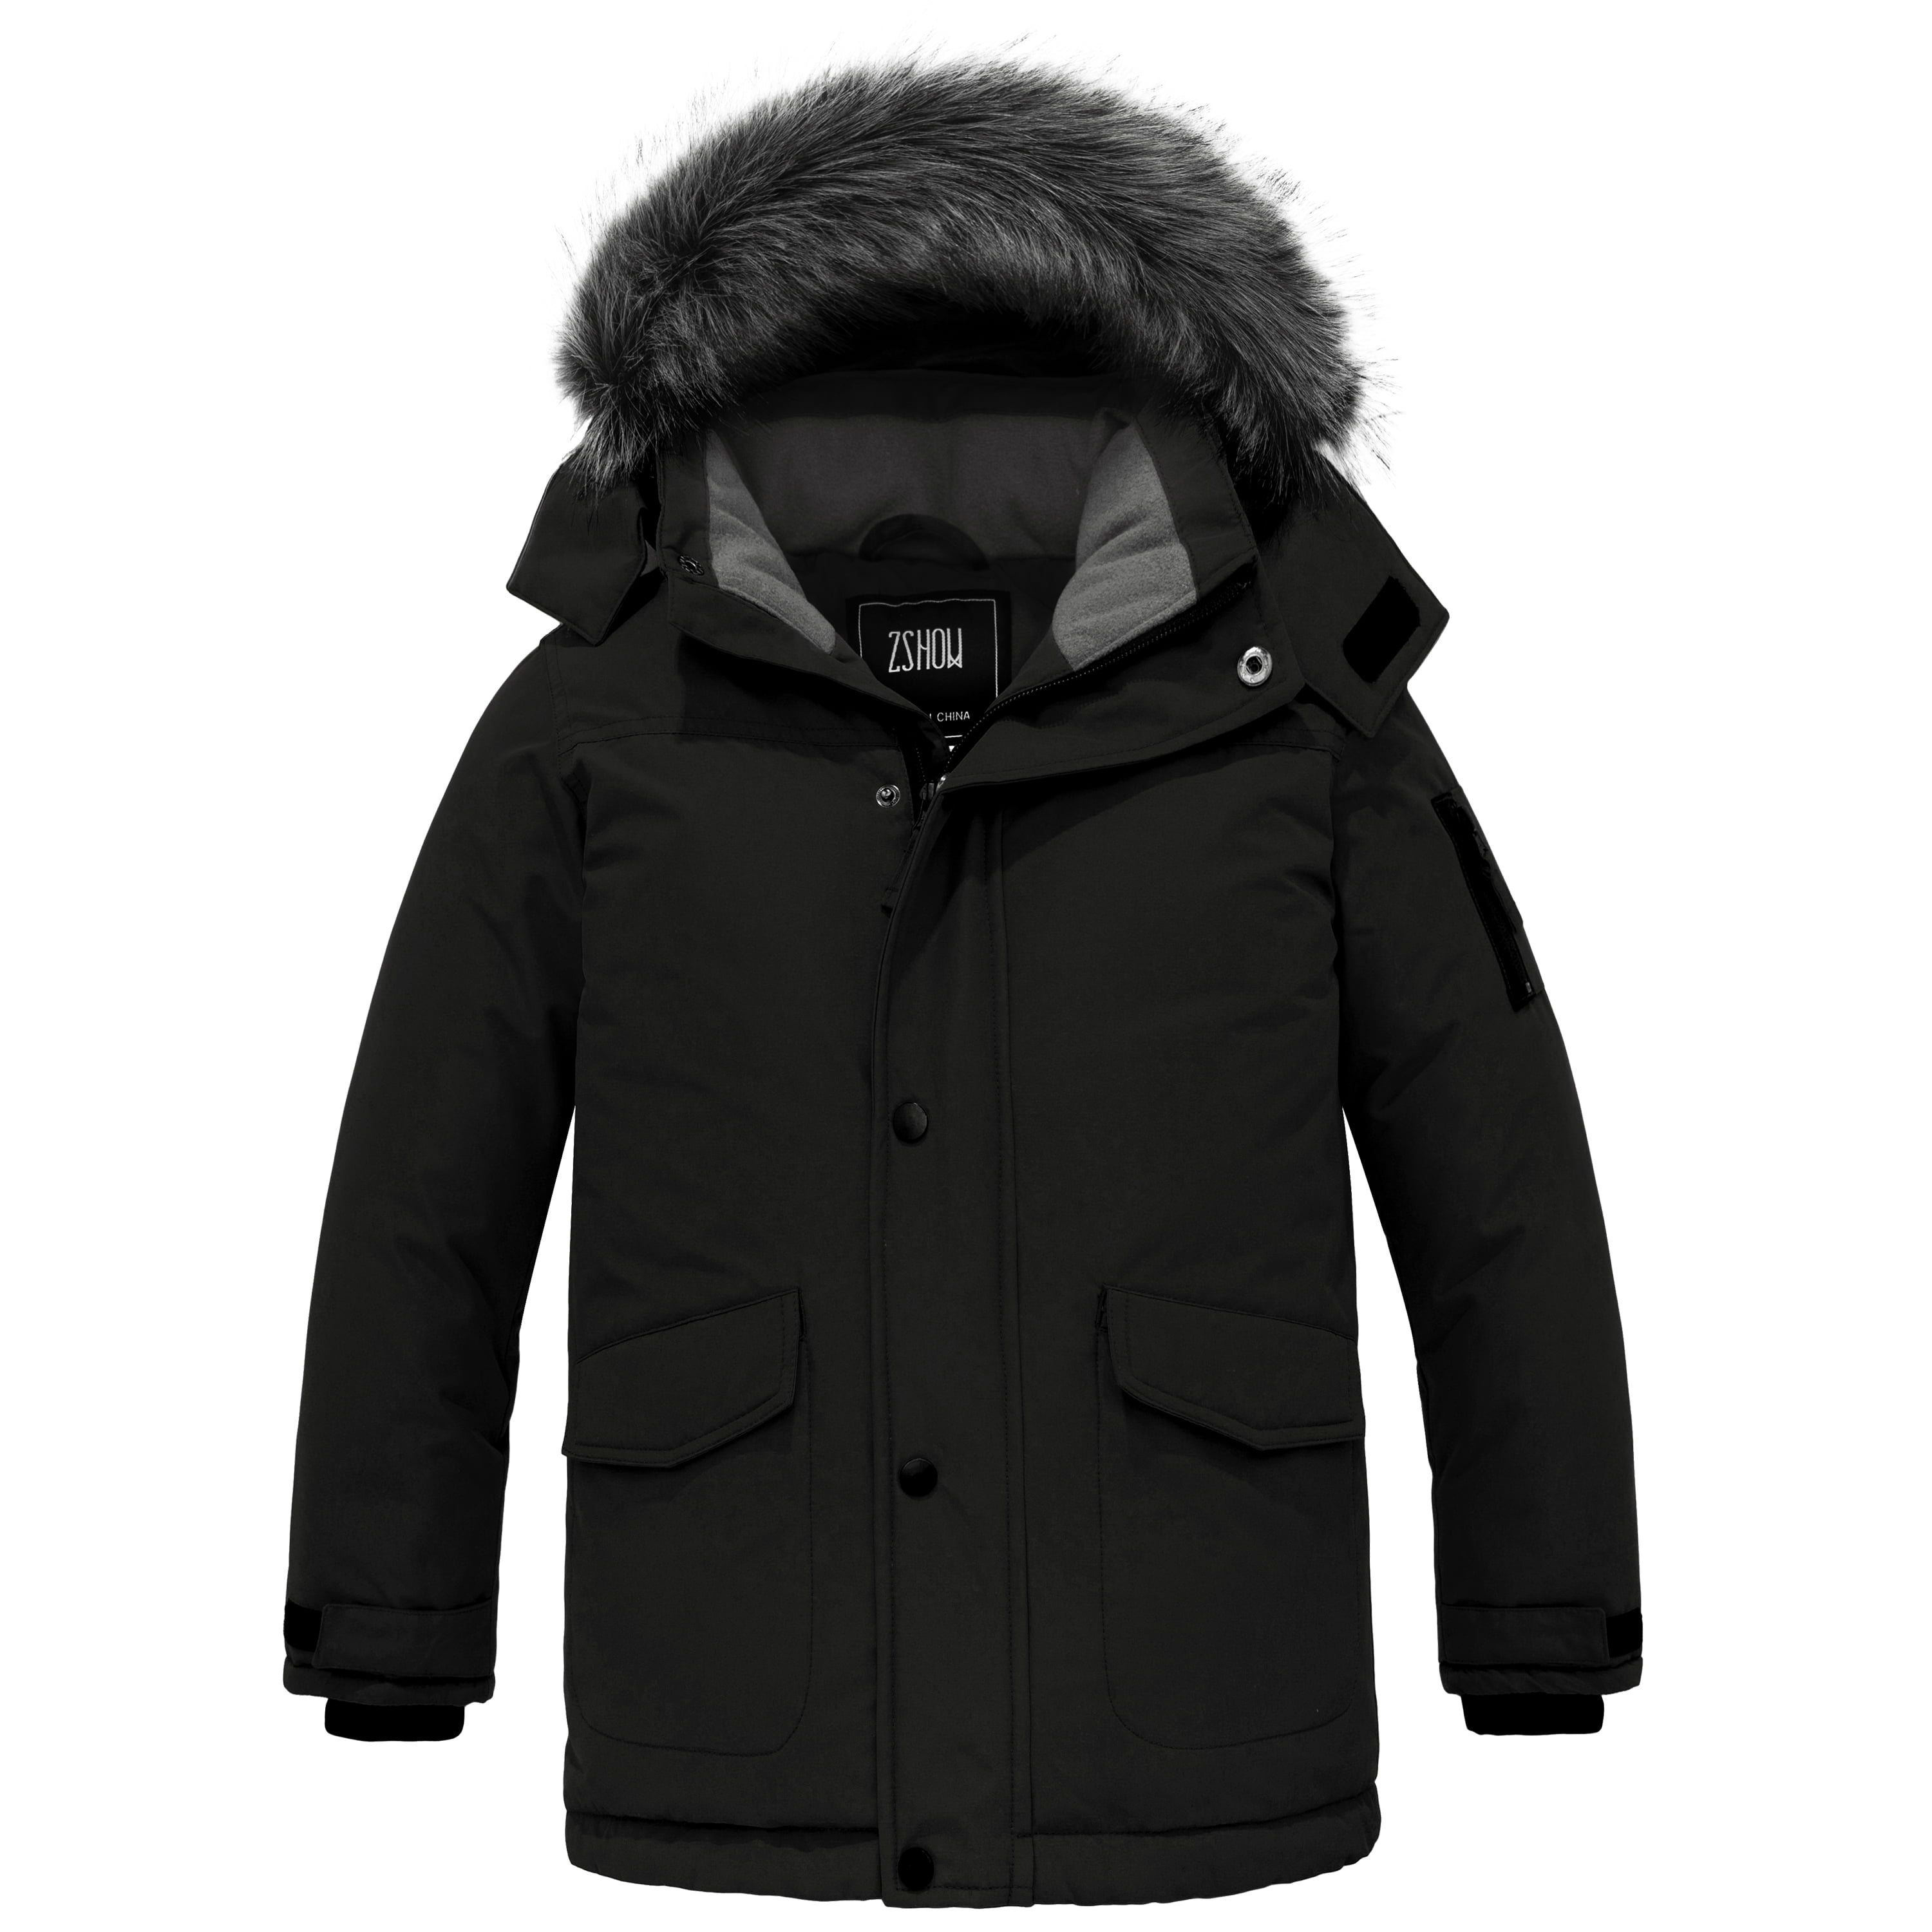 ZSHOW Boys Hooded Puffer Jacket Thick Padded Winter Coat Windproof Parka 